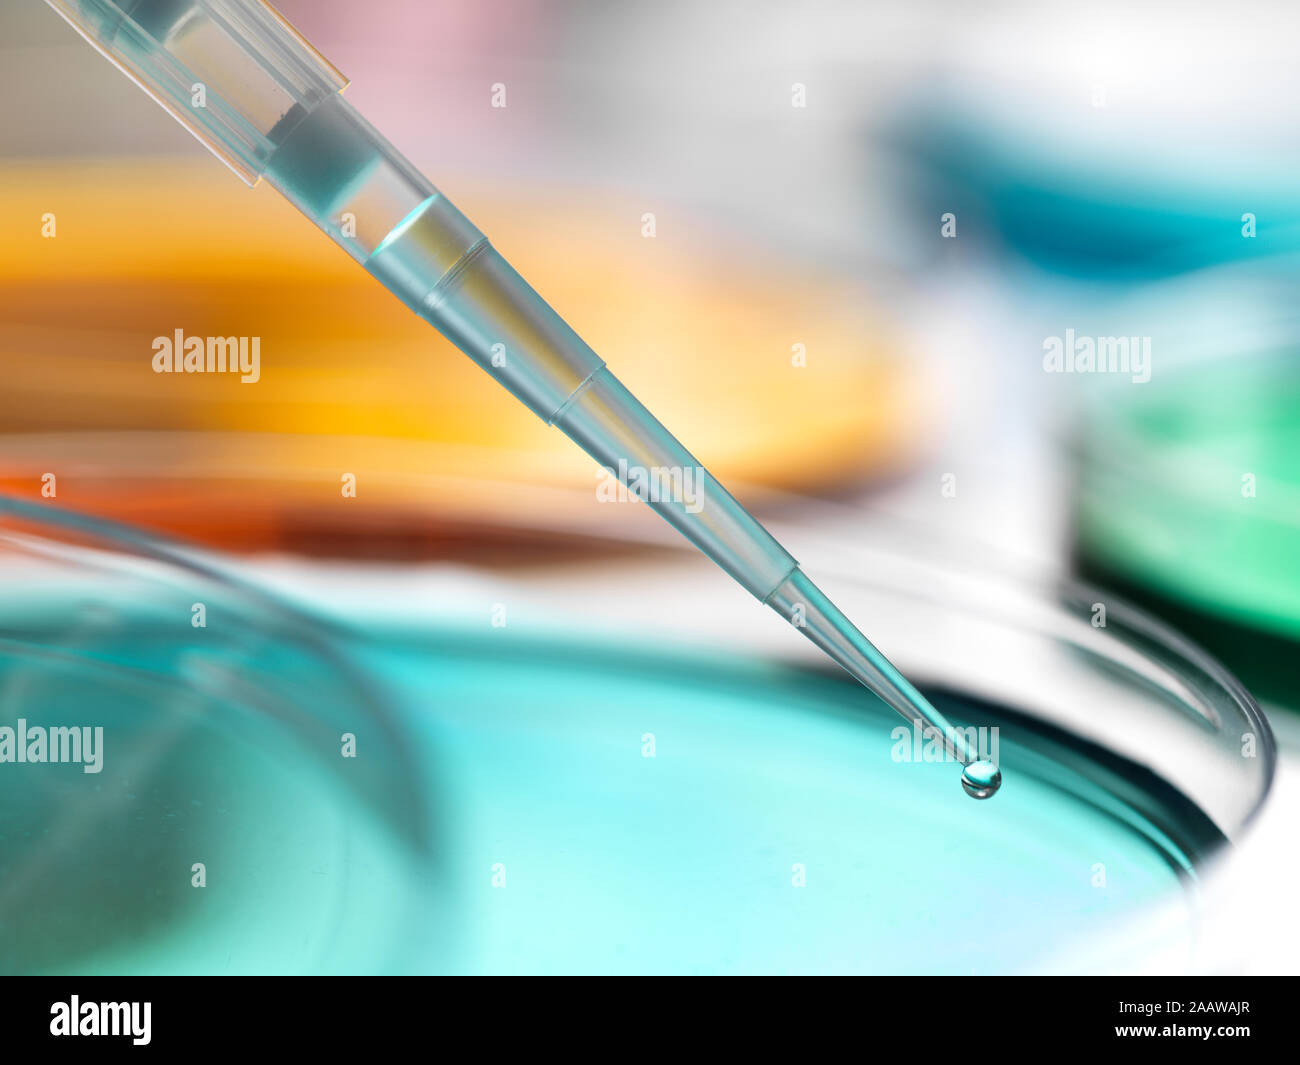 Close-up of samples pipetting in petri dish containing agar jelly at laboratory Stock Photo